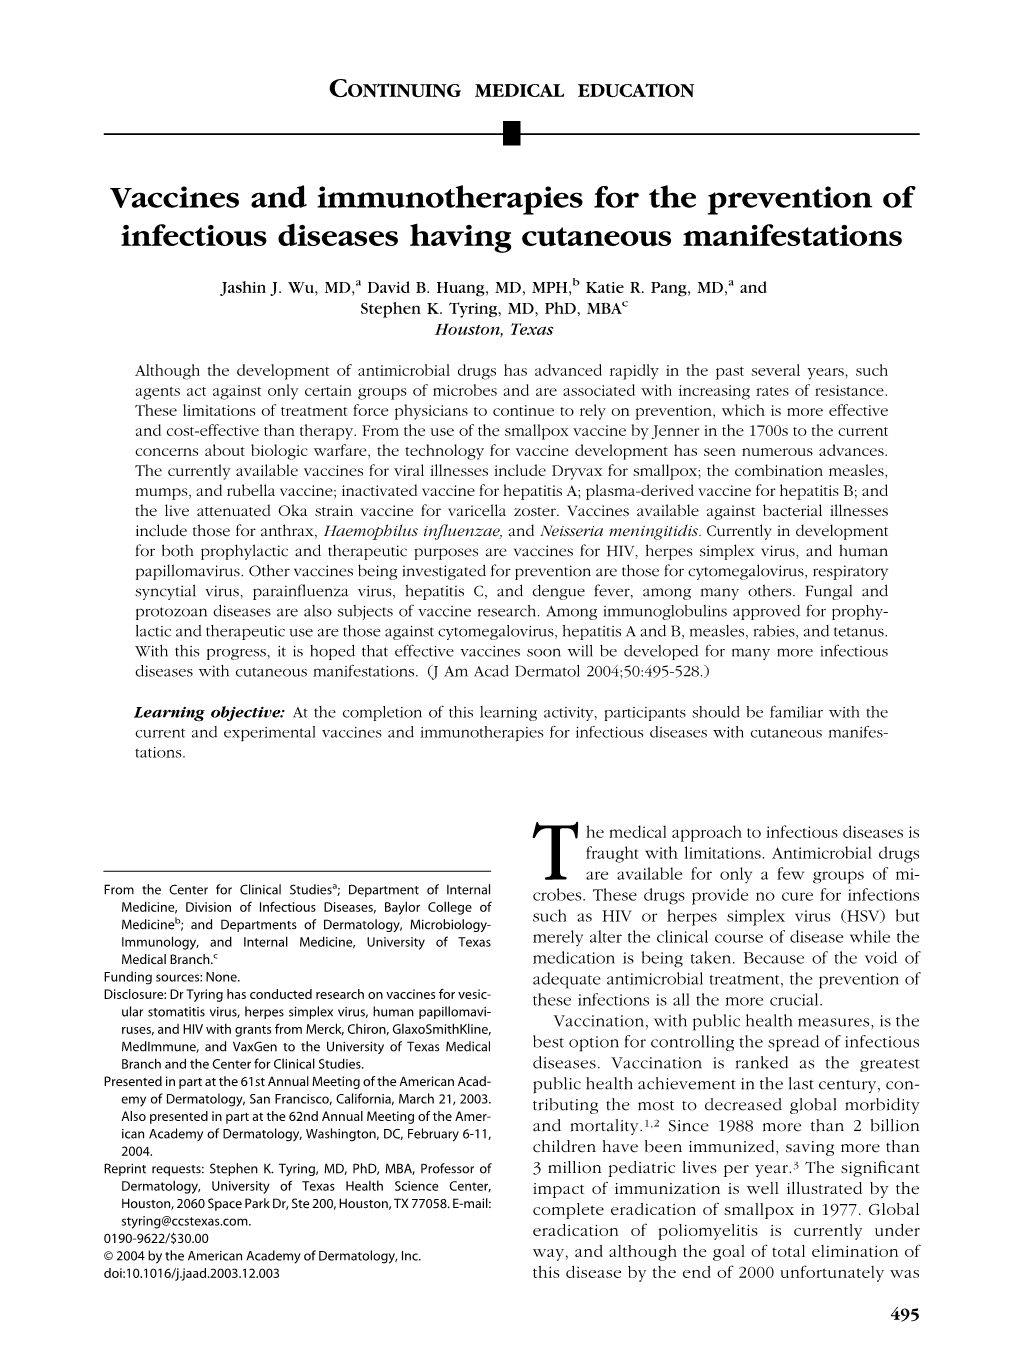 Vaccines and Immunotherapies for the Prevention of Infectious Diseases Having Cutaneous Manifestations